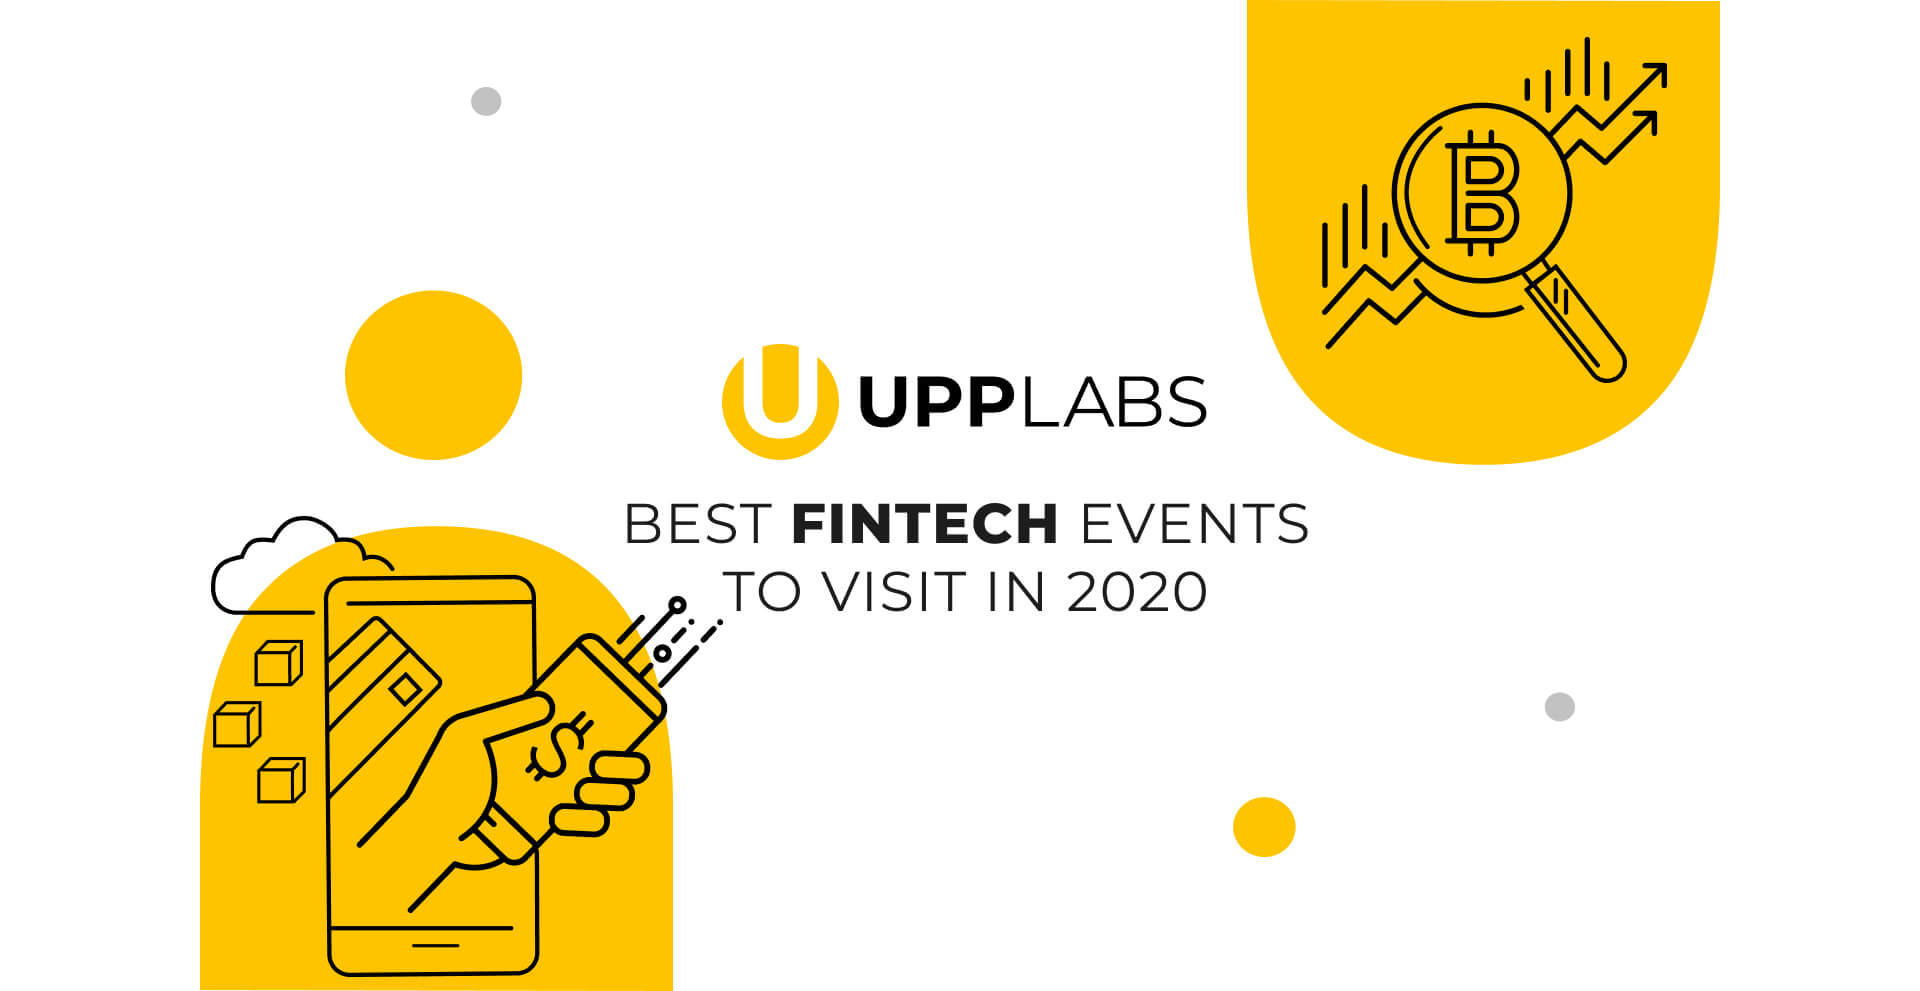 Best FinTech events to visit in 2020. By Upplabs